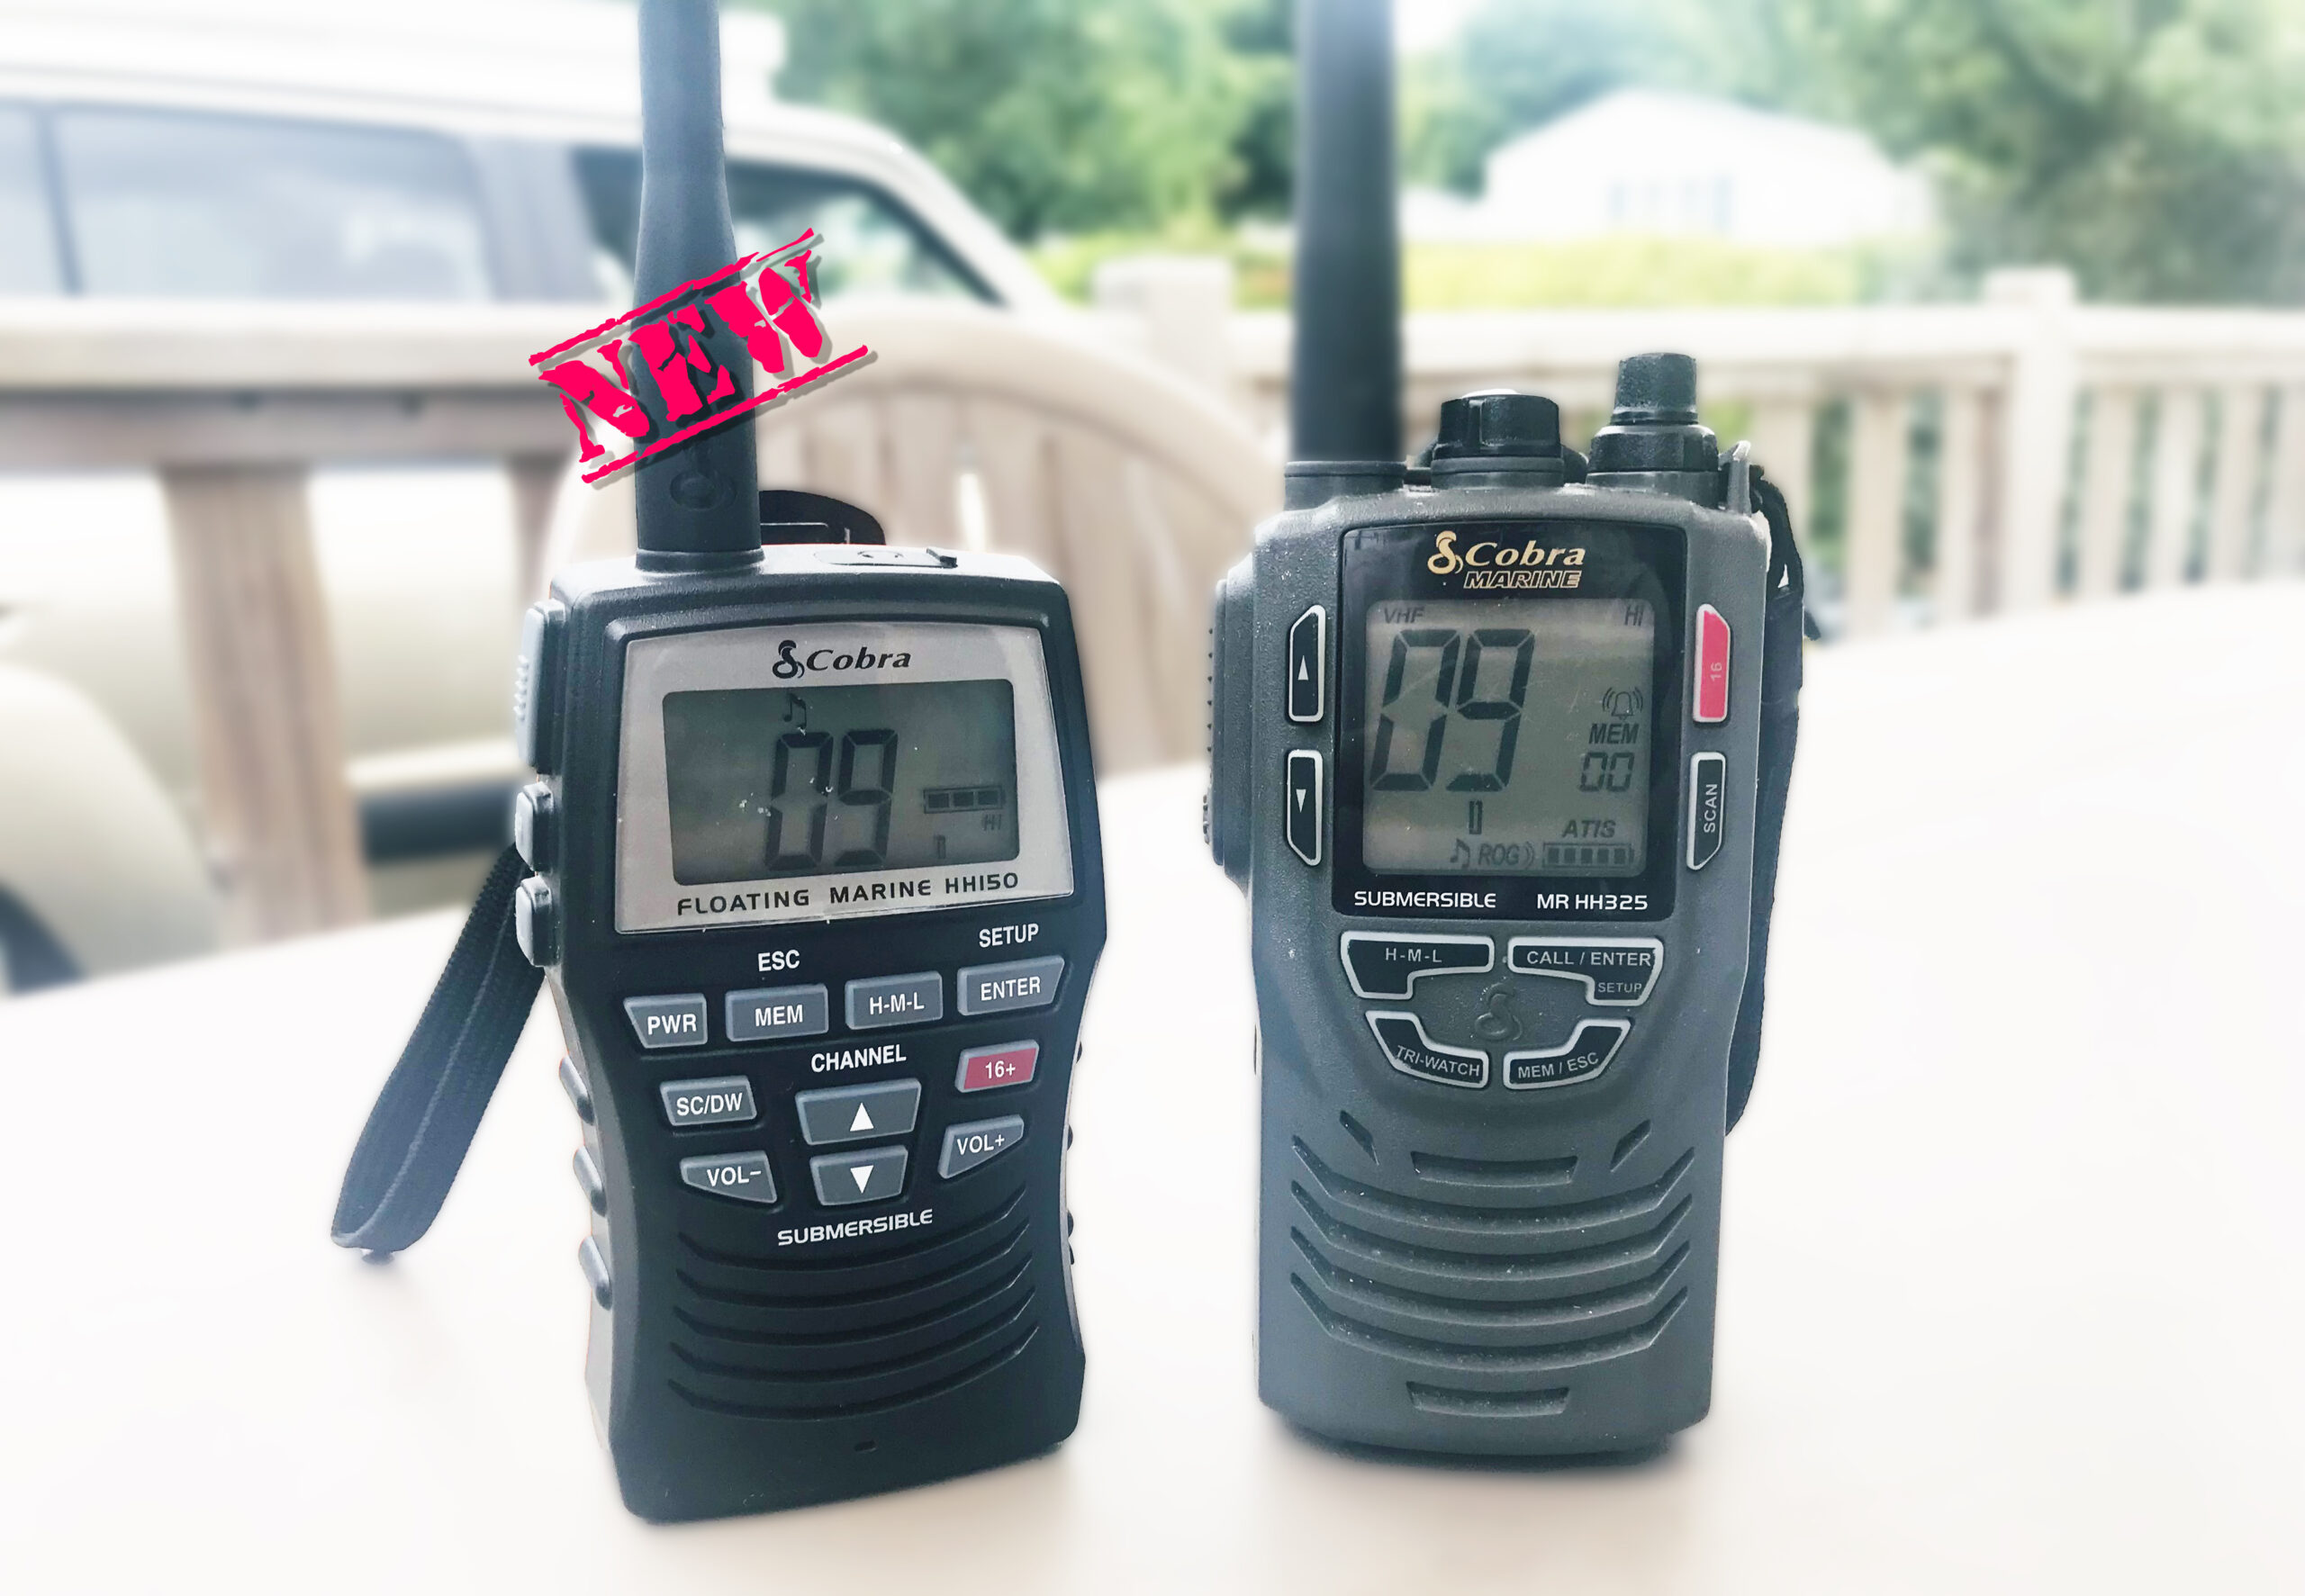 Why I Had to Buy a Second Cobra Handheld VHF Radio @ RIBs ONLY - Home of the Rigid Inflatable Boat